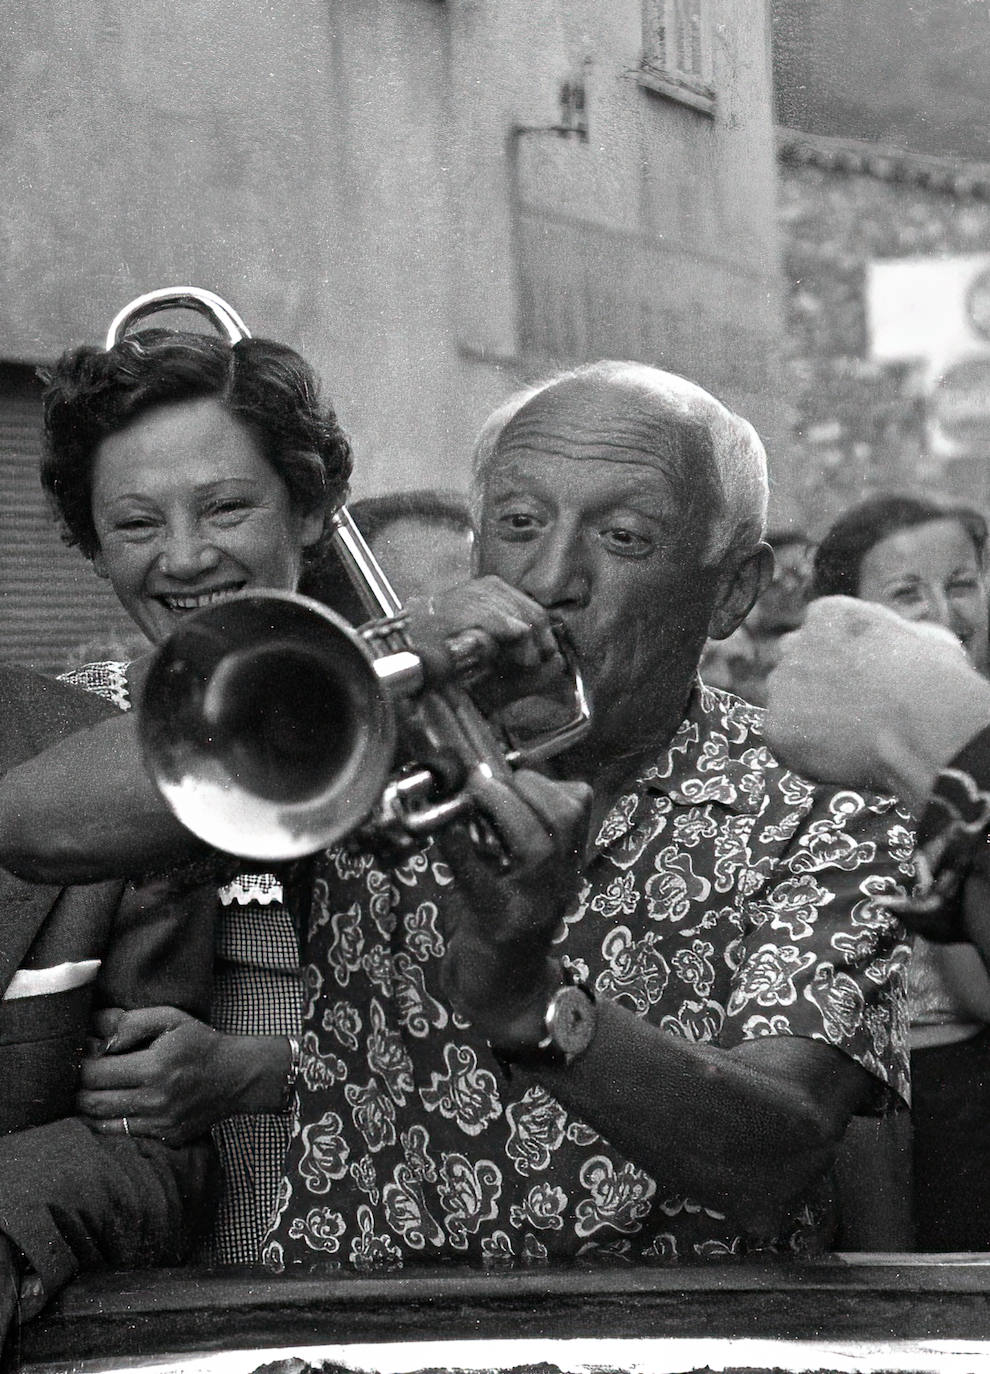 Picasso having fun with a trumpet, even though he didn't know how to play.